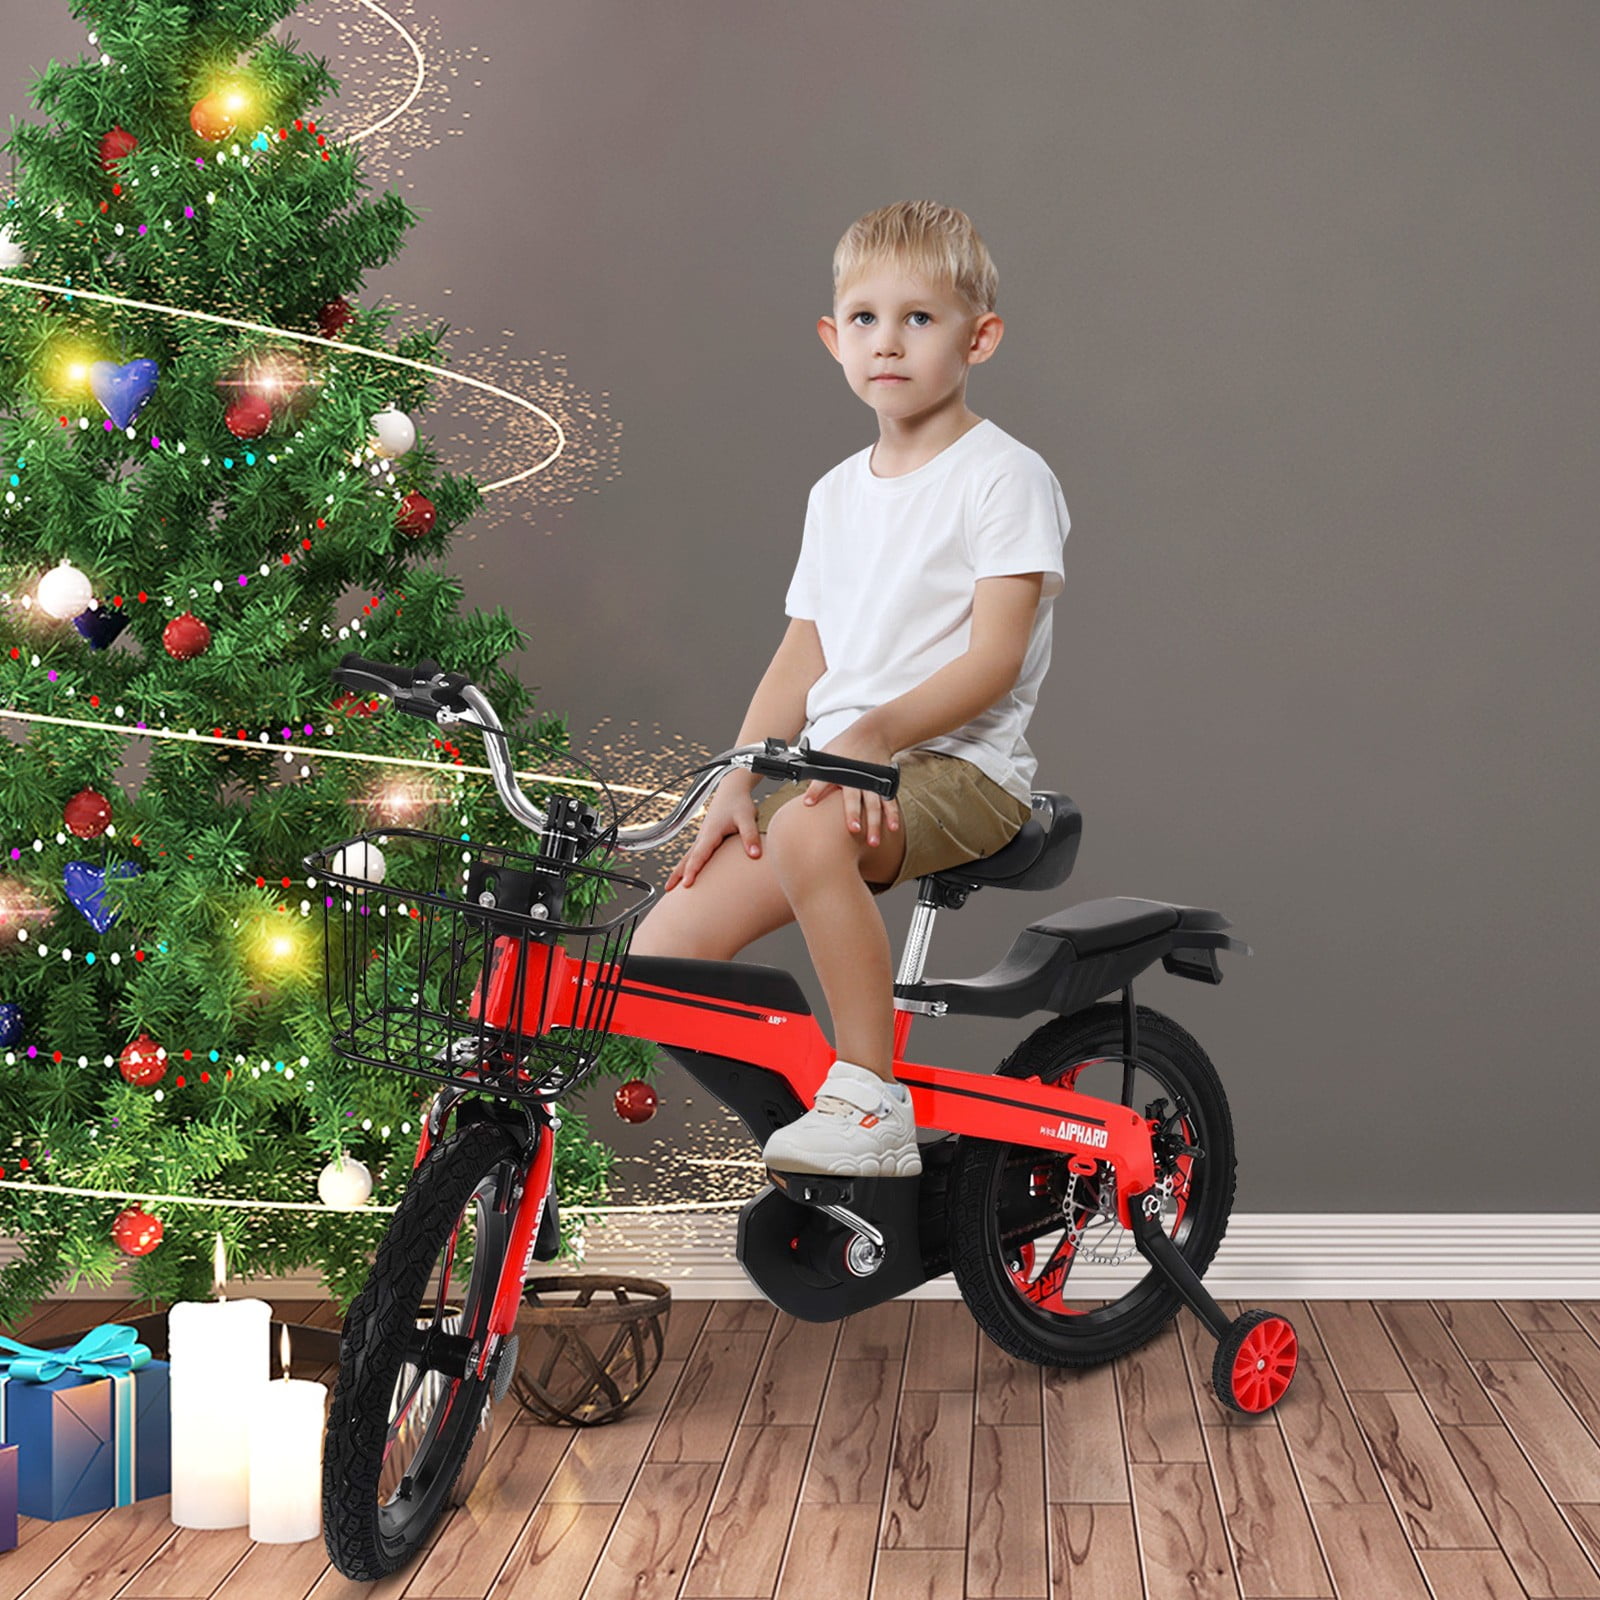 Details about   Kids Bike Training Wheels For 3-6 Years Old 14 Inch Magnesium Alloy Bicycle 